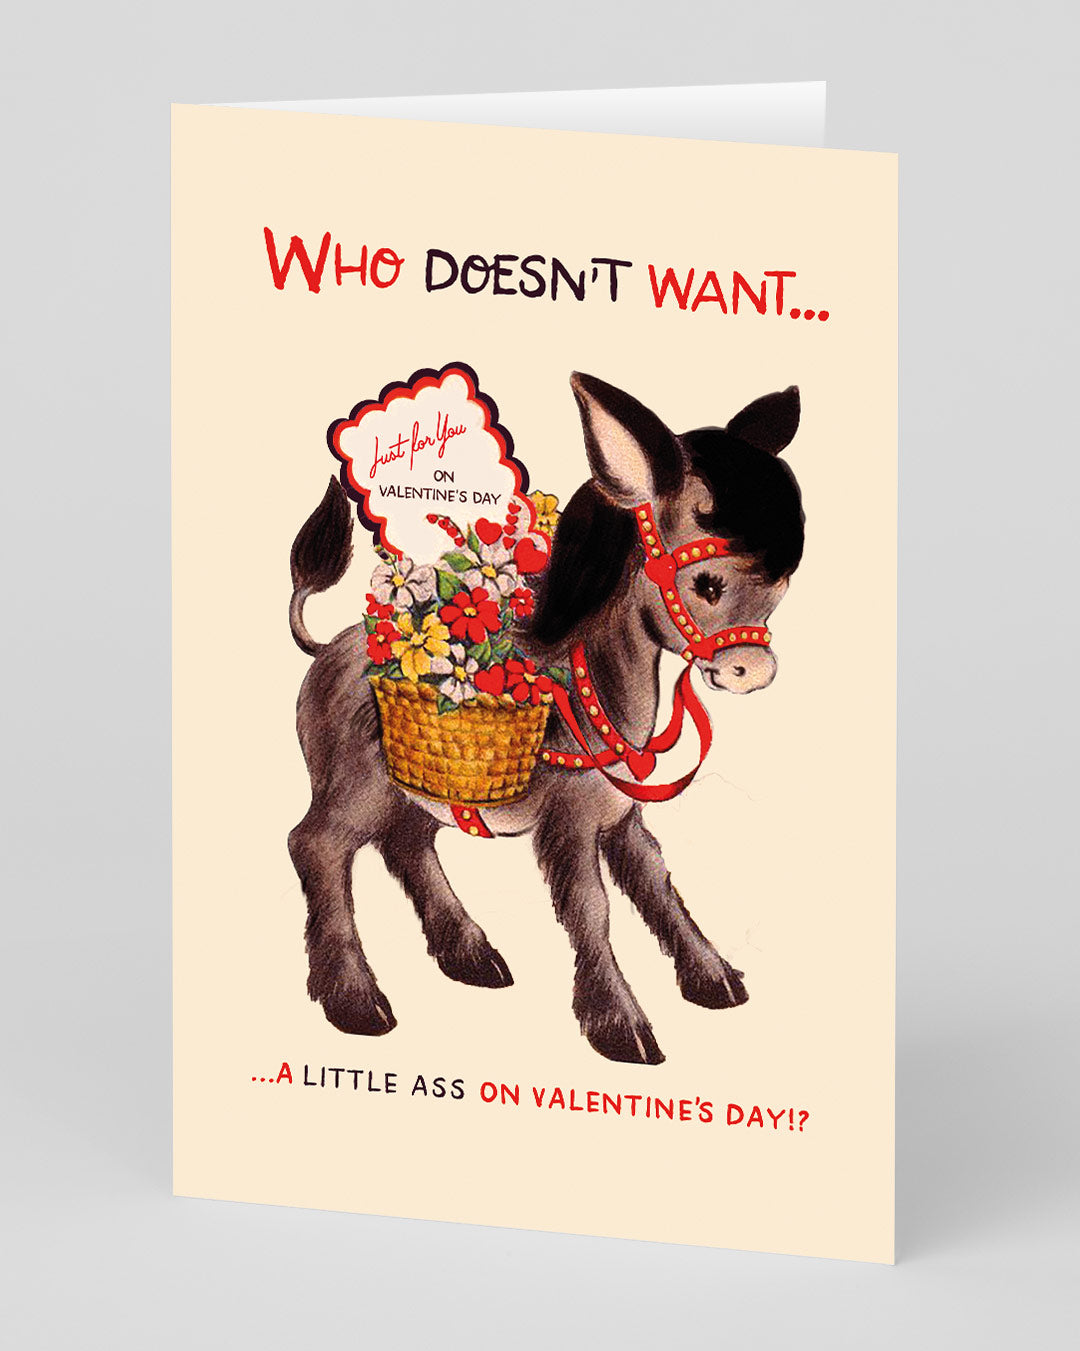 Valentine’s Day | Rude Funny Valentines Card For Him or Her | Personalised A Little Ass Valentine’s Day Card | Ohh Deer Unique Valentine’s Card | Made In The UK, Eco-Friendly Materials, Plastic Free Packaging